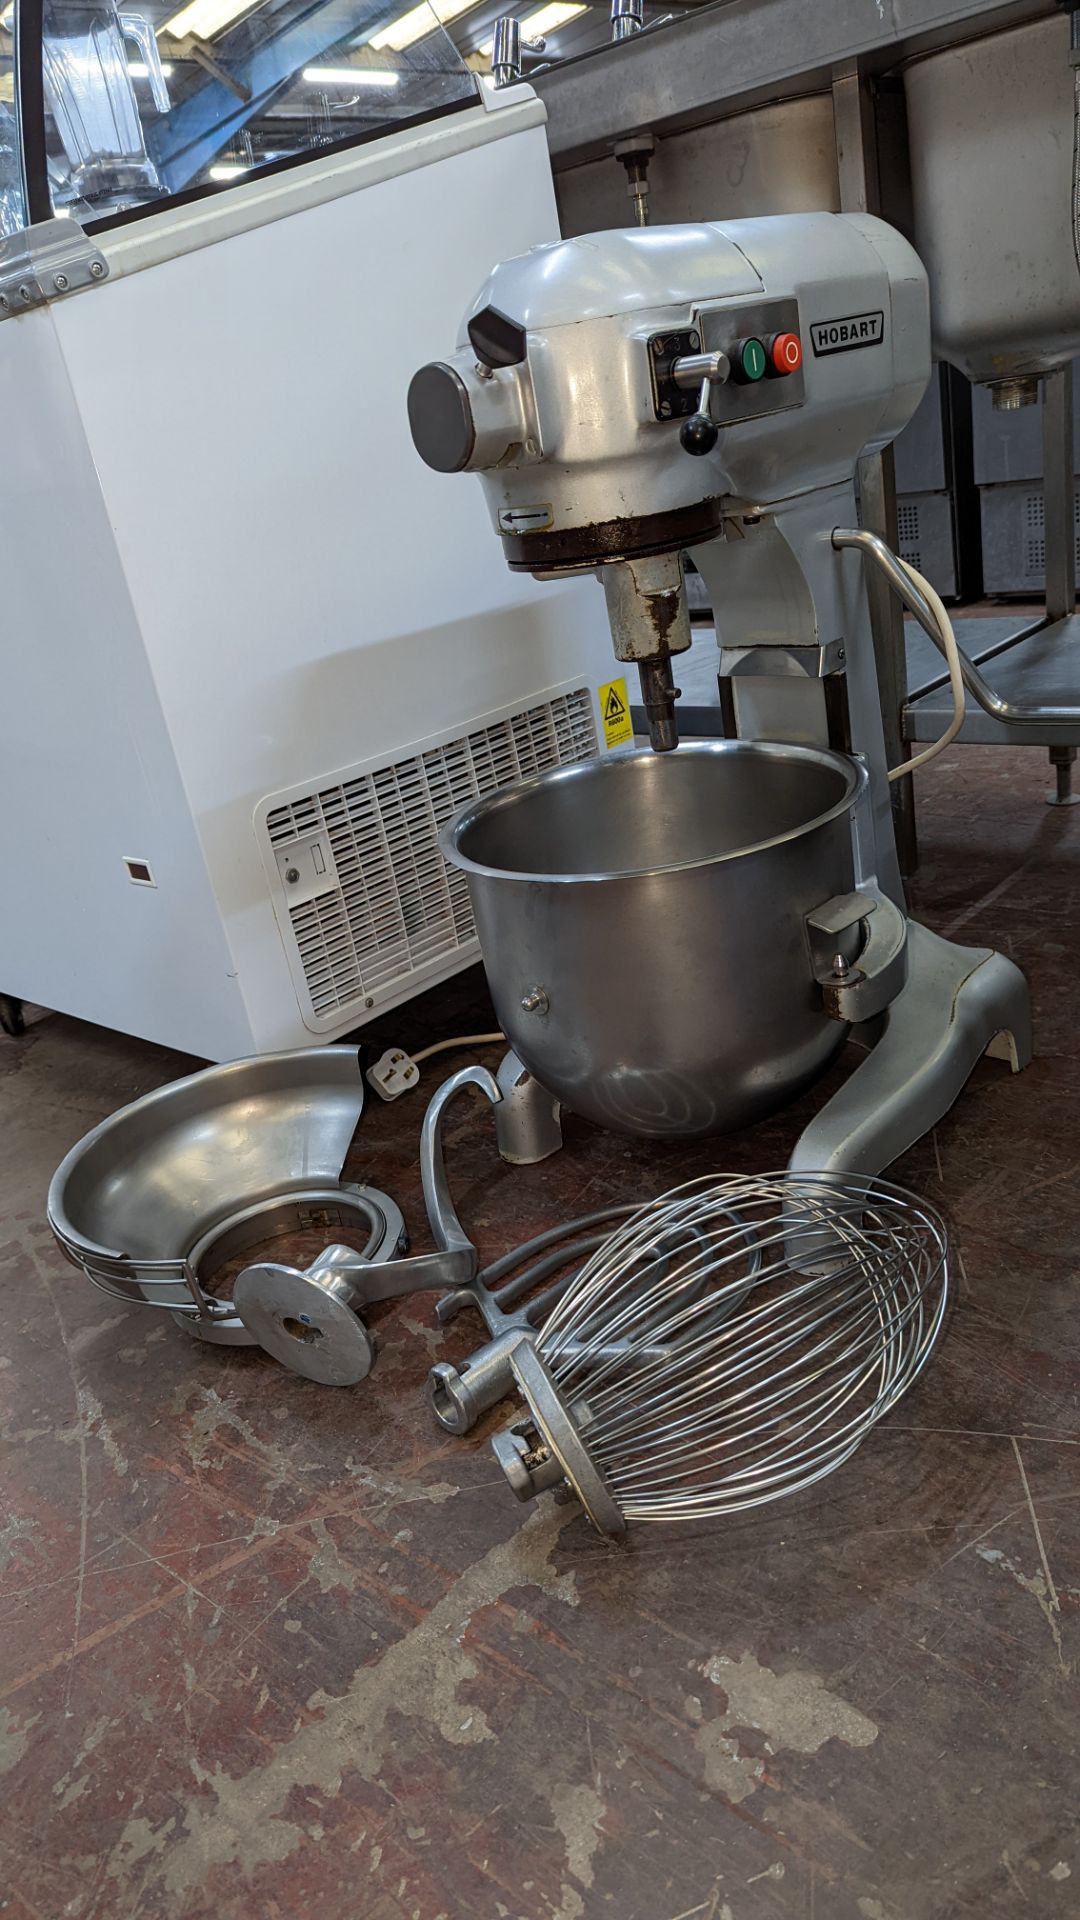 Hobart commercial mixer incorporating removable bowl, guard & 3 assorted paddle/mixer attachments - Image 10 of 11